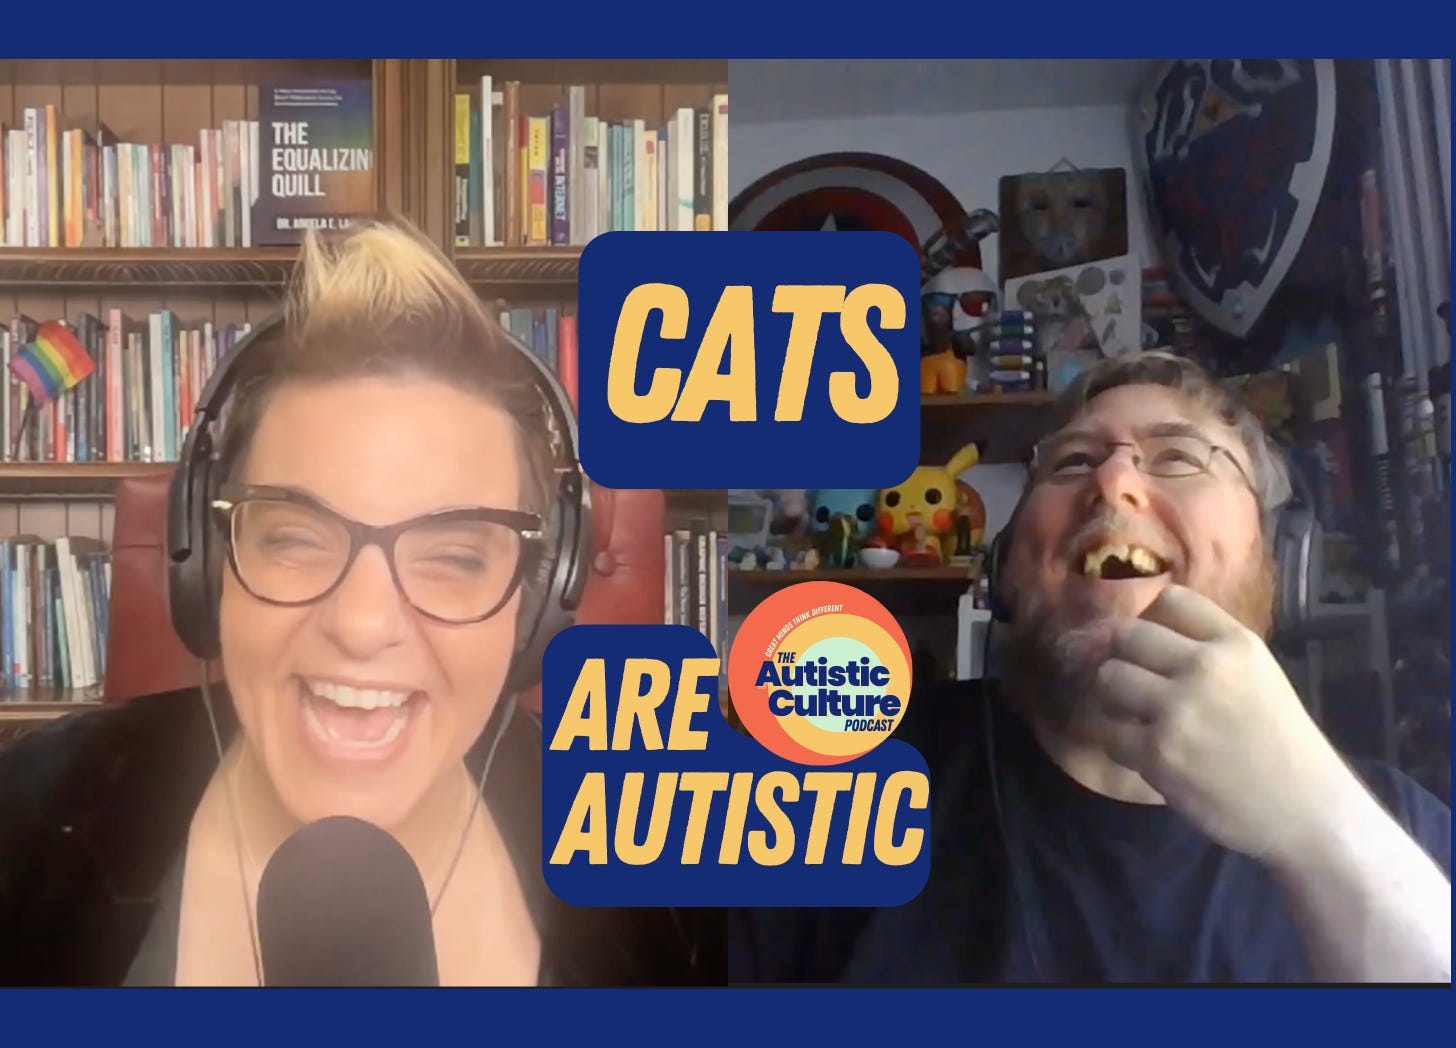 Listen to Autistic podcast hosts discuss: Cats are Autistic. Autism podcast | Are cats Autistic? Matt and Angela discuss how cats exhibit behaviors and traits that align with Autistic experiences.